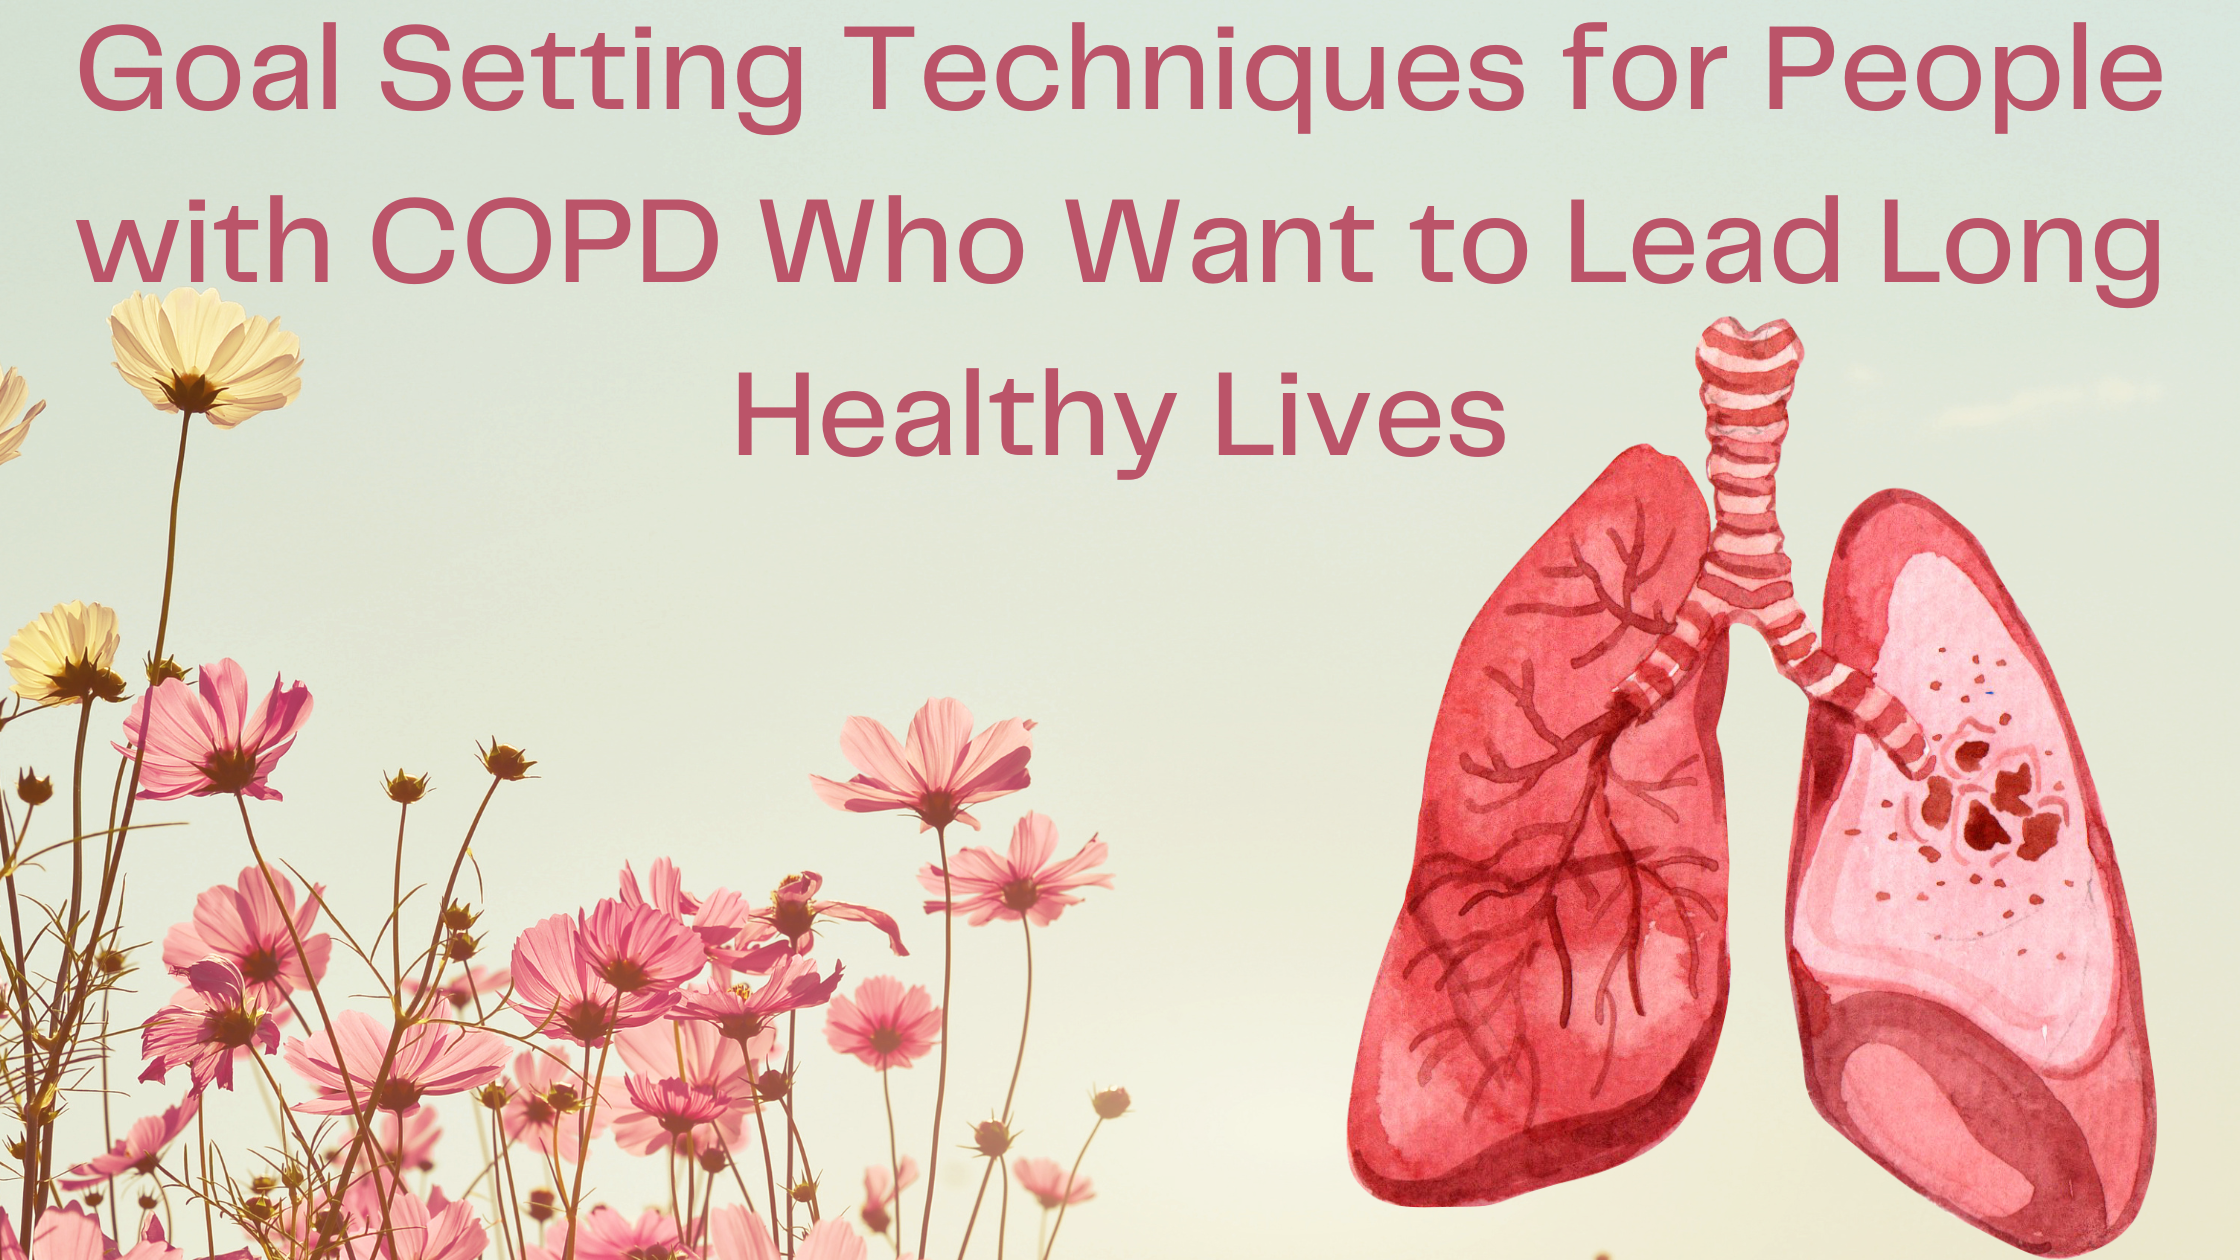 Goal Setting Techniques for People with COPD Who Want to Lead Long Healthy Lives